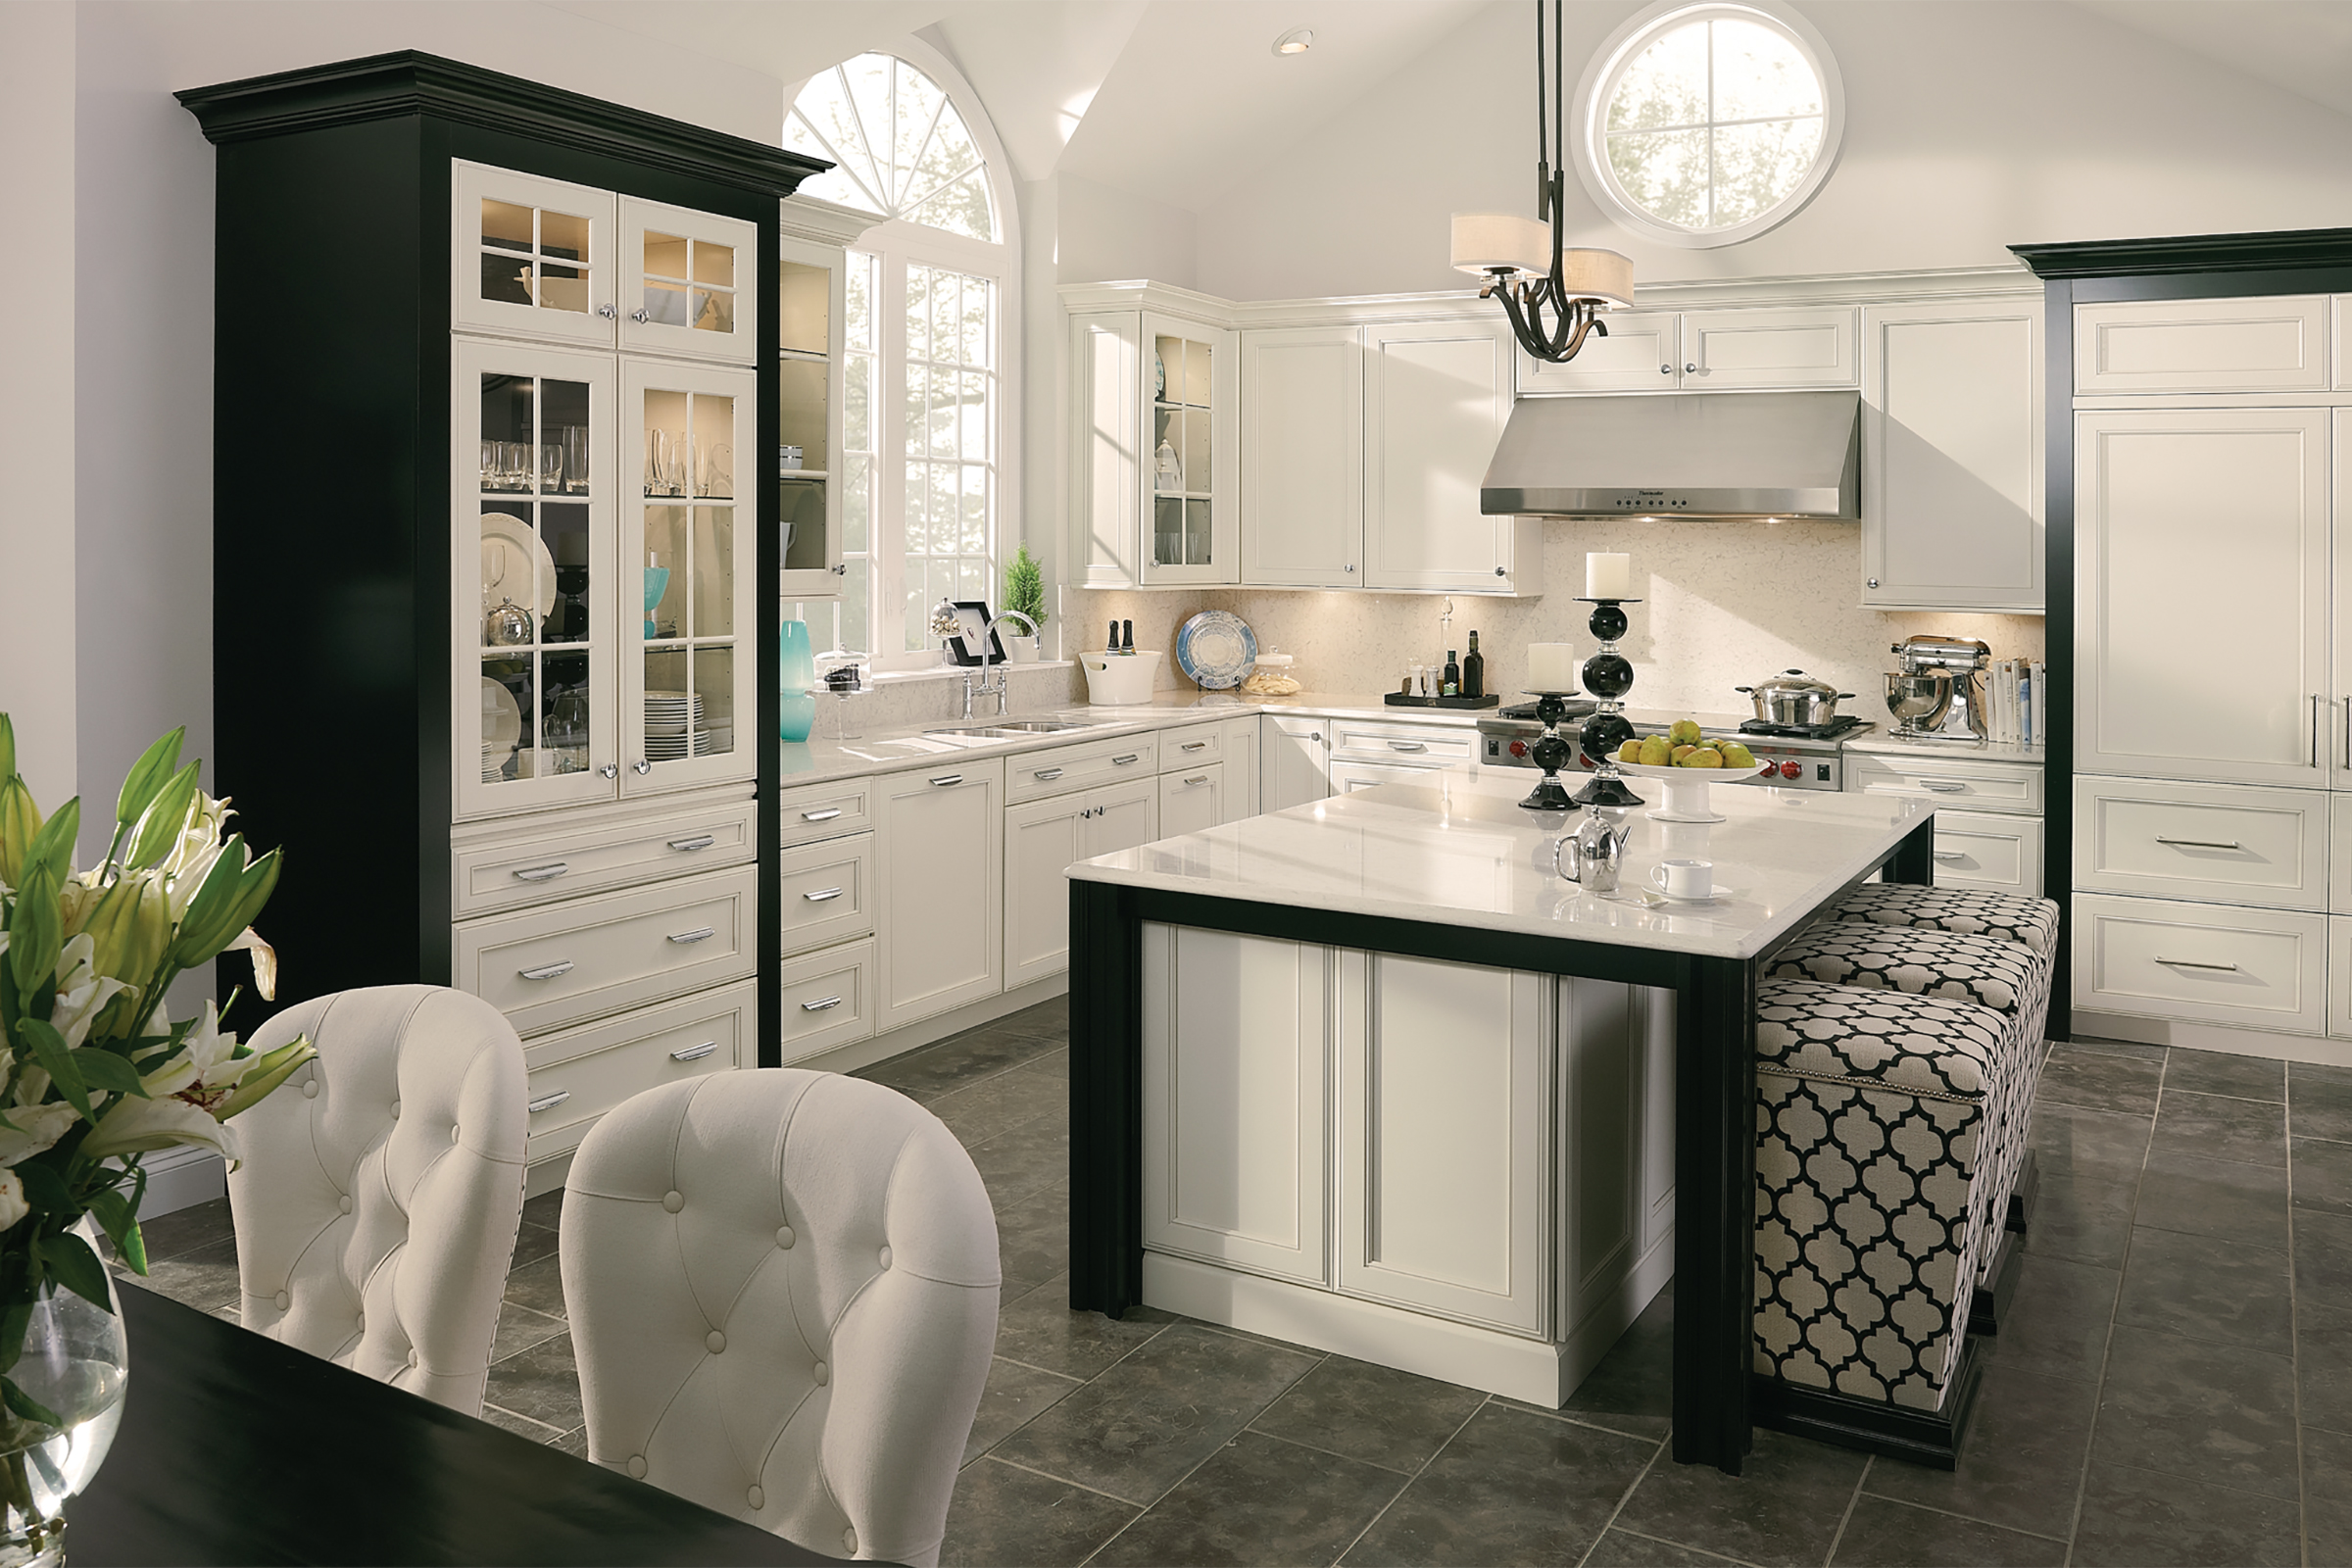 KraftMaid cabinetry in off-white Canvas paint punctuated with black Onyx accents in a glam two-tone tuxedo kitchen design